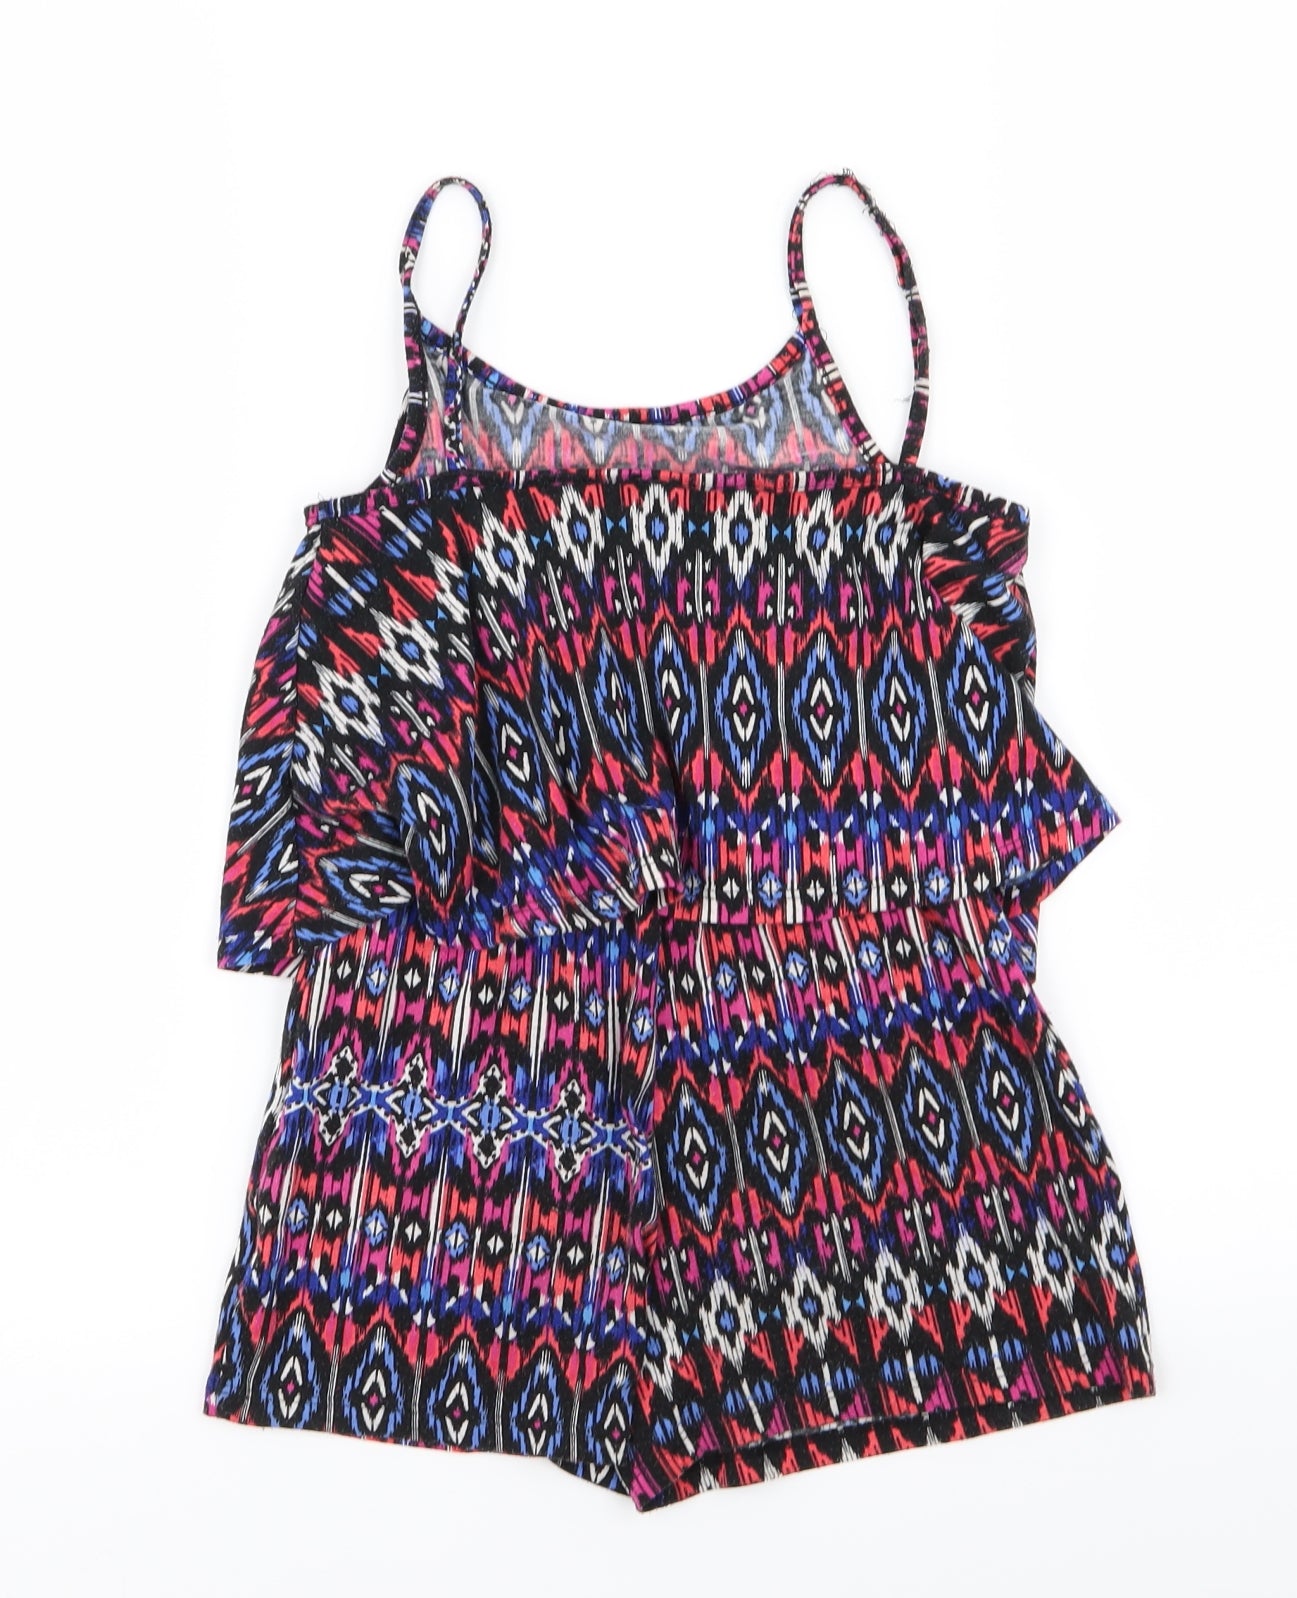 YD Girls Multicoloured Geometric  Playsuit One-Piece Size 7-8 Years